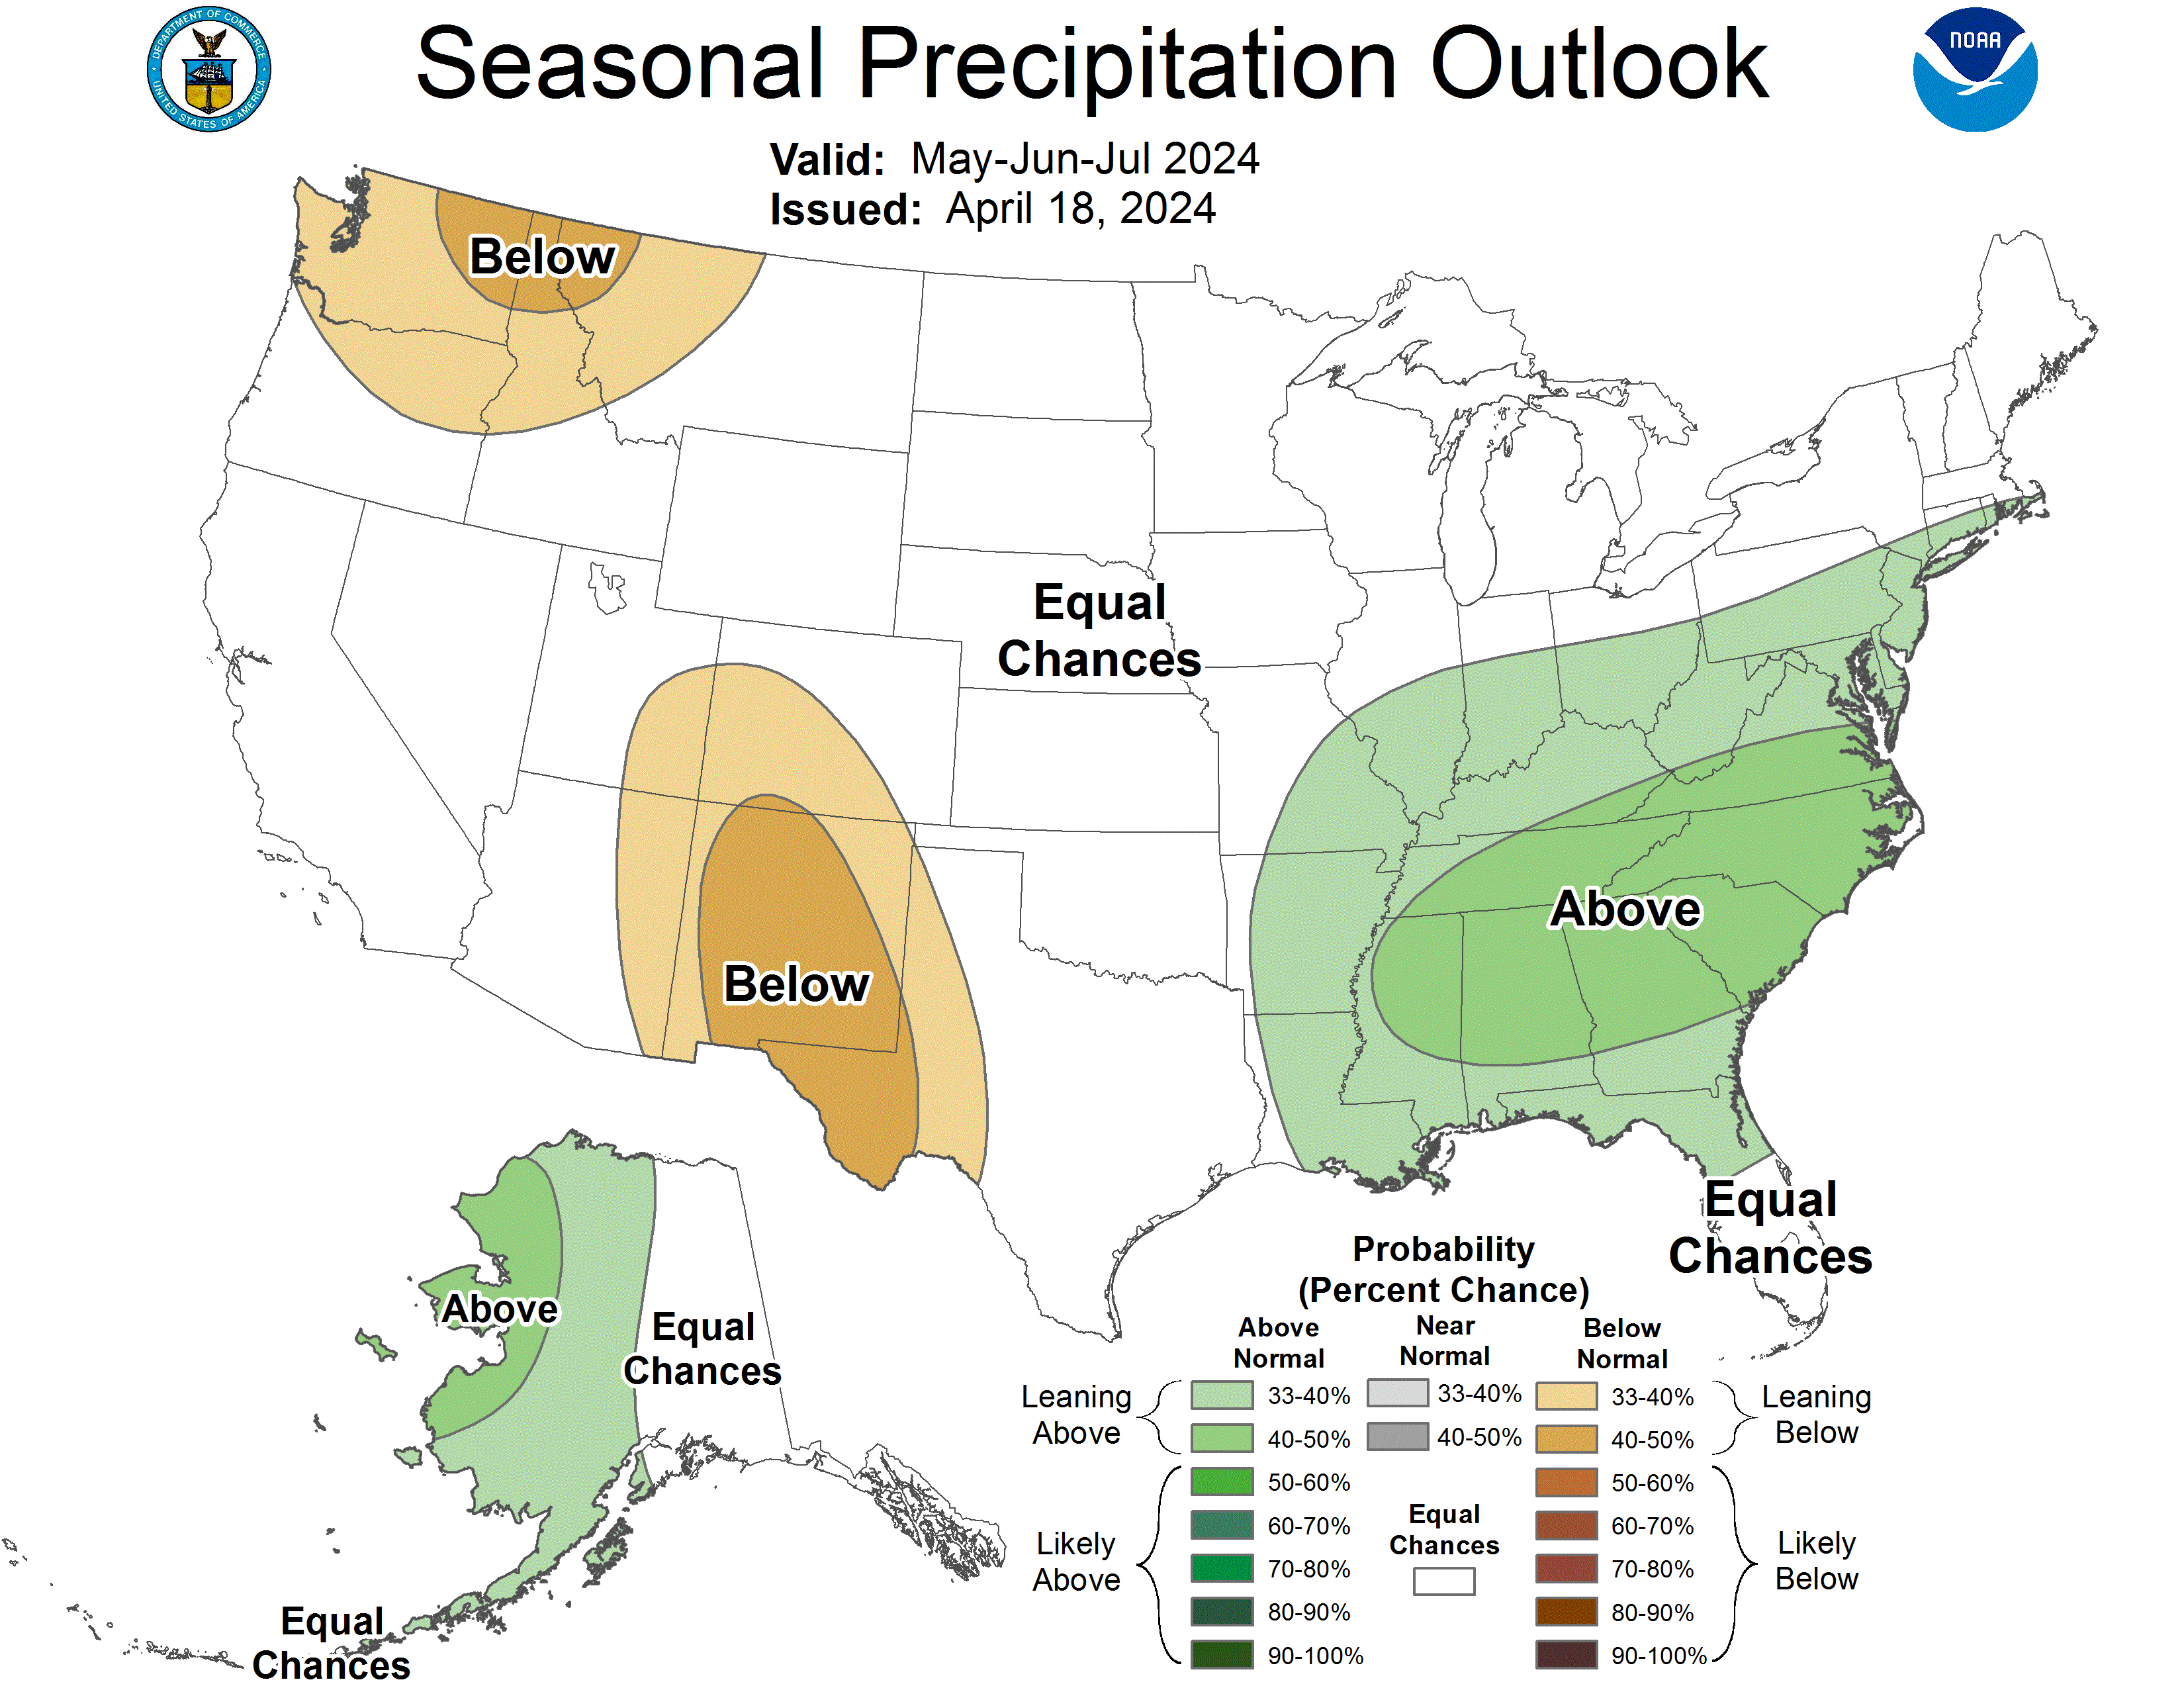 official three monthly precipitation outlooks from the CPC